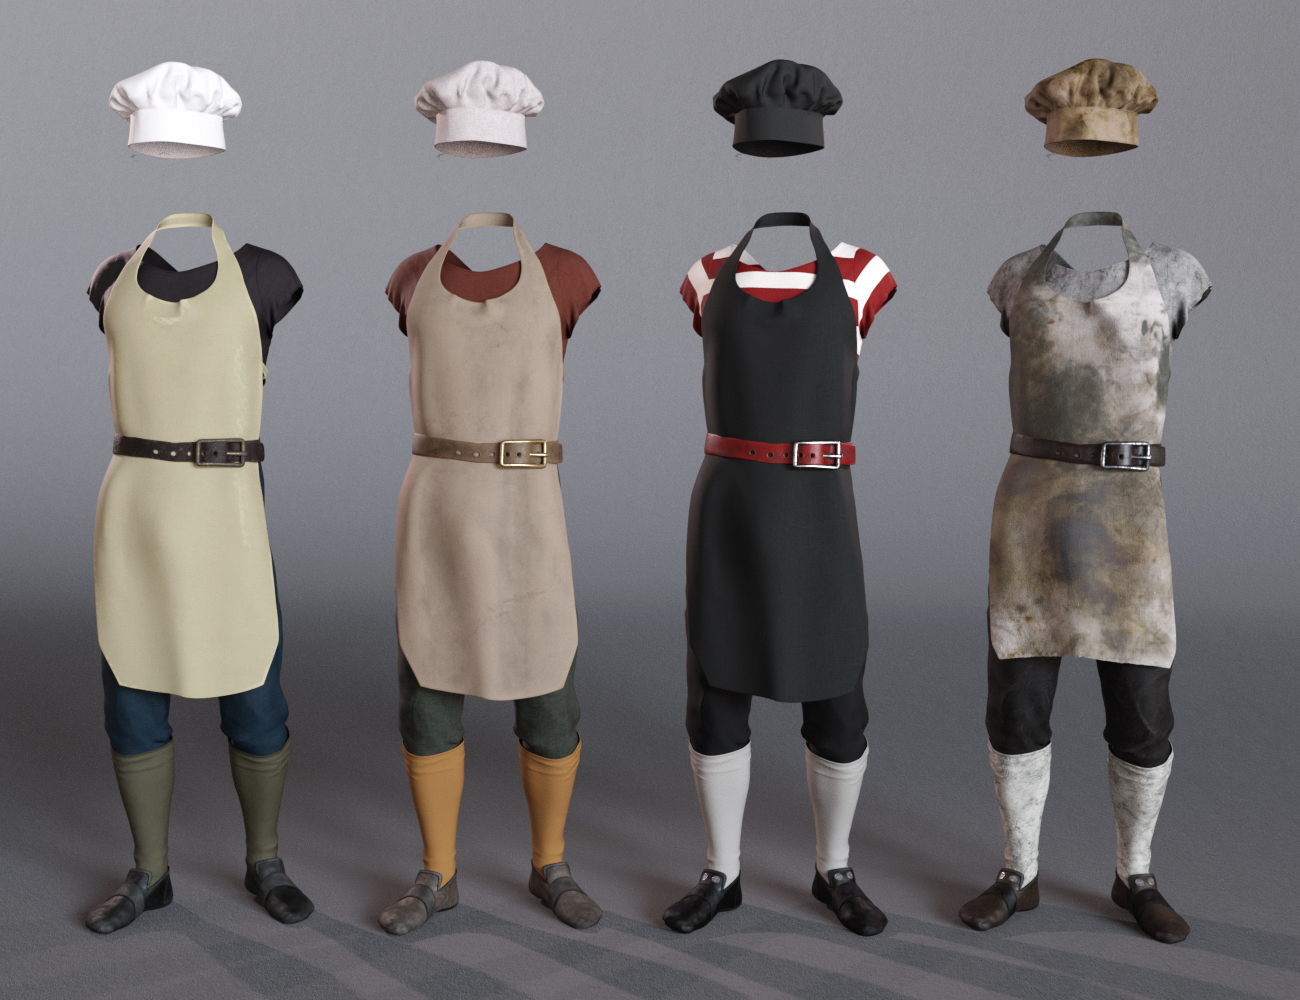 dForce Crazy Chef Outfit Textures by: Moonscape GraphicsSade, 3D Models by Daz 3D